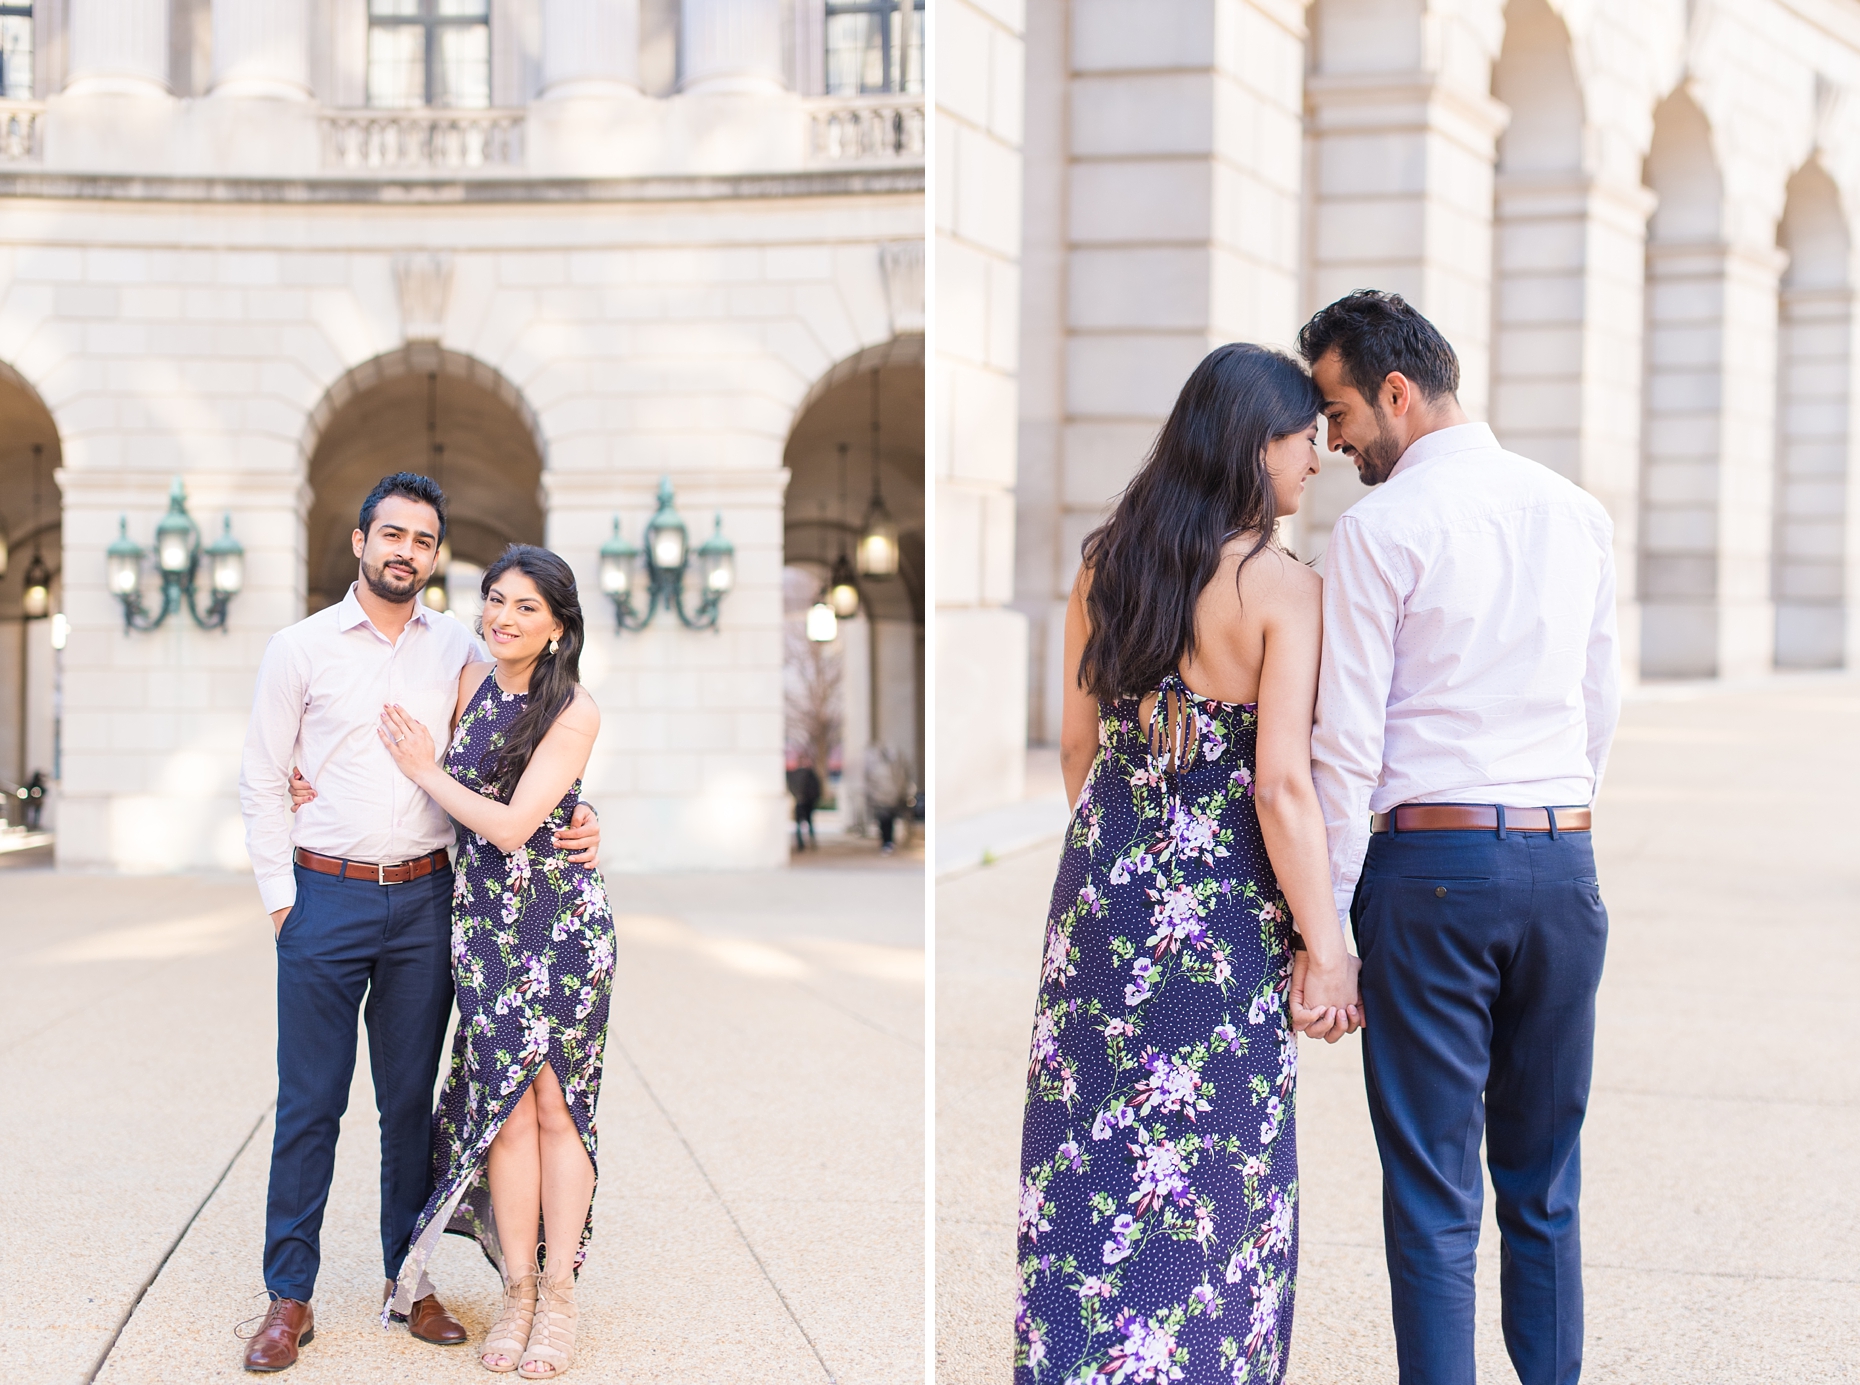 CapitolHillDCEngagementSessionPhotography-ManaliPhotography-003